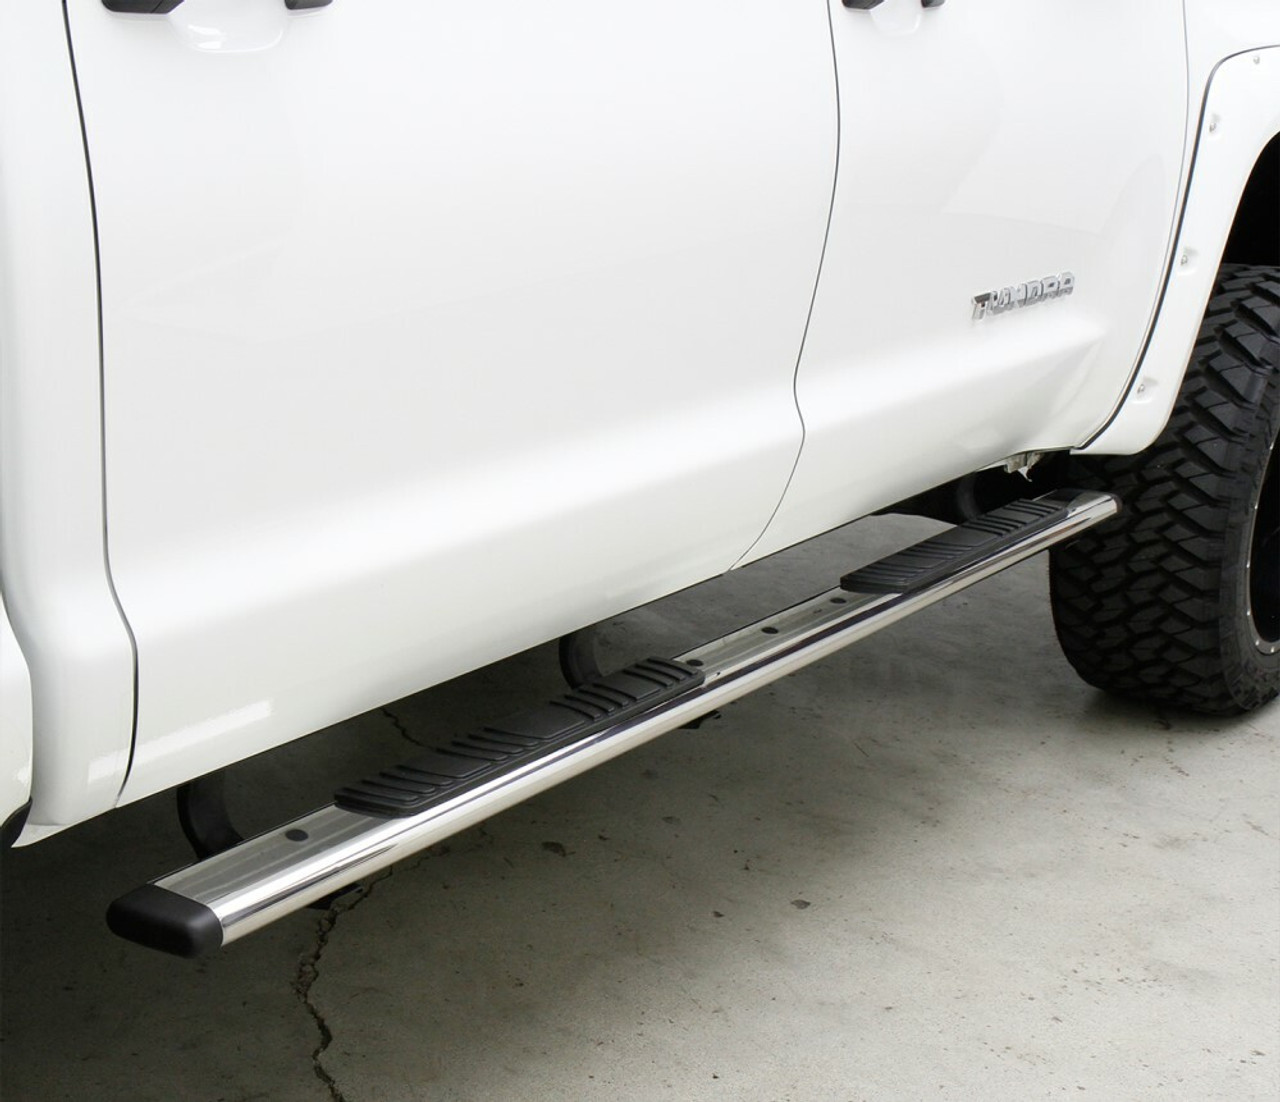 Go Rhino 685404780PS Chevy, Silverado 2500HD, 3500HD, 2020-2021, 5 inch OE Xtreme Low Profile - Complete Kit: Stainless steel, Polished, 650080PS side bars + 6840475 OE Xtreme Brackets. 5 inch x 80 inch bars, Diesel or Gas, New Body Style Only